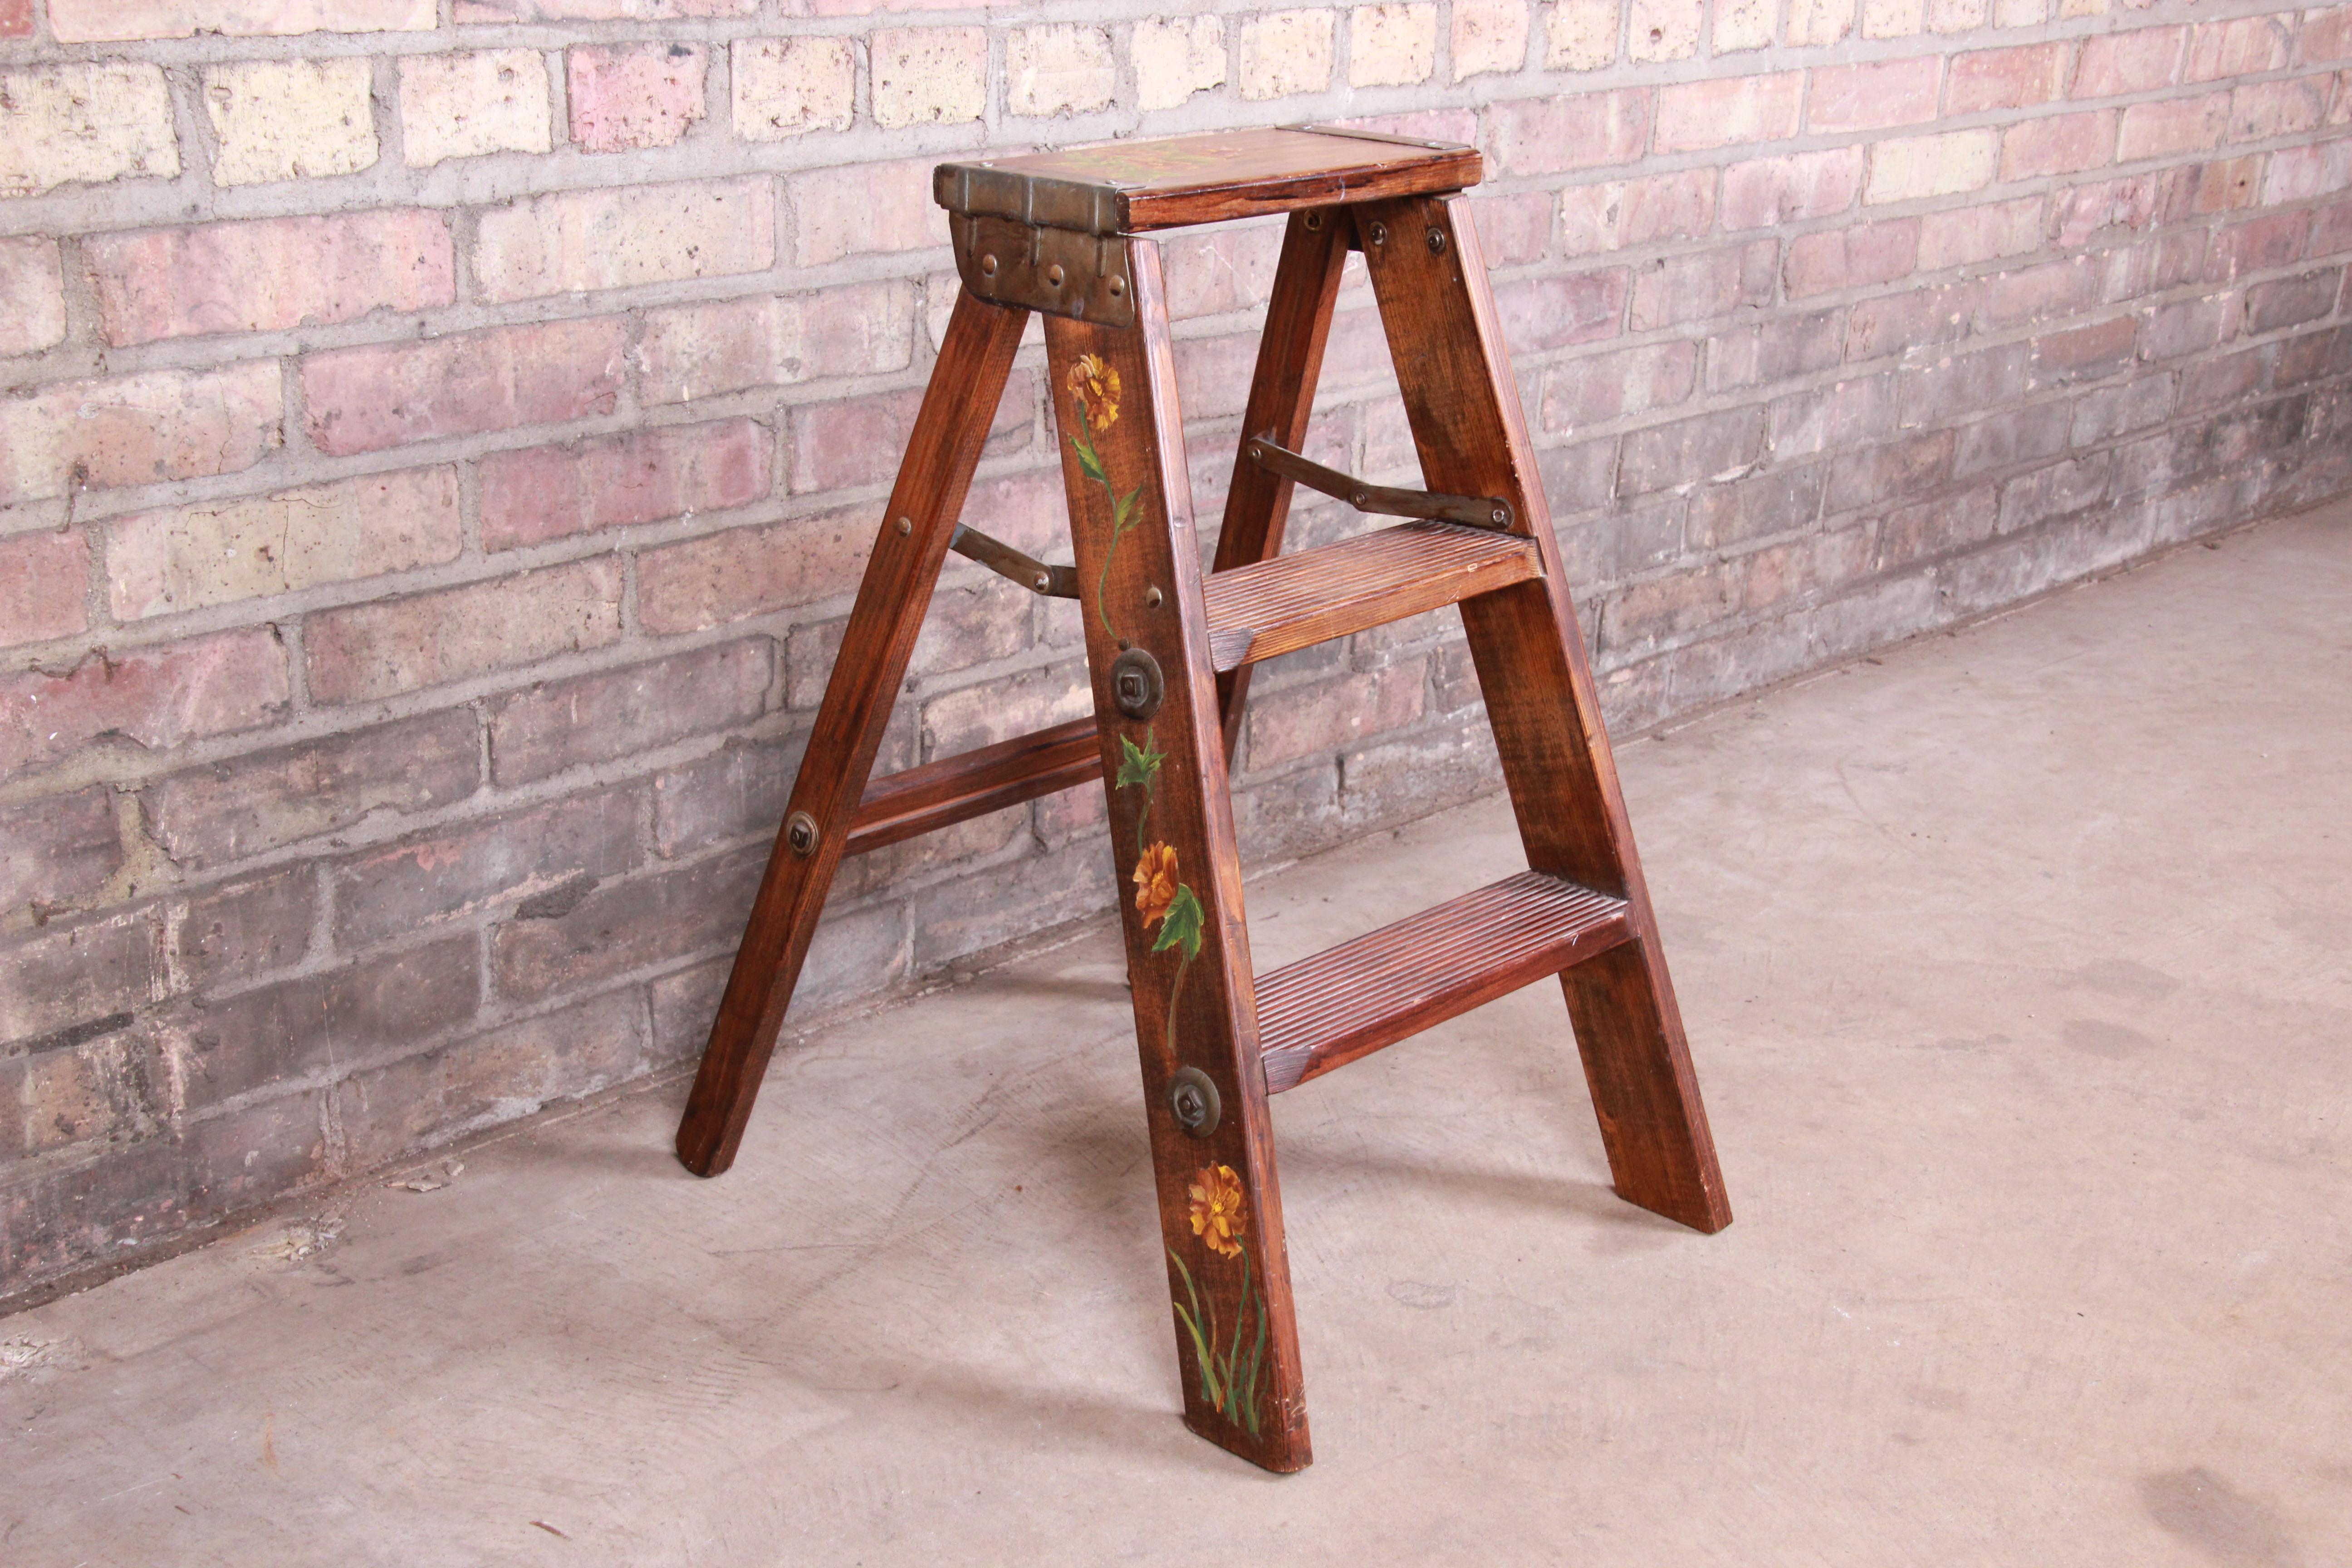 A nice vintage wooden step ladder with hand painted floral design

USA, 20th century

Measures: 14.75